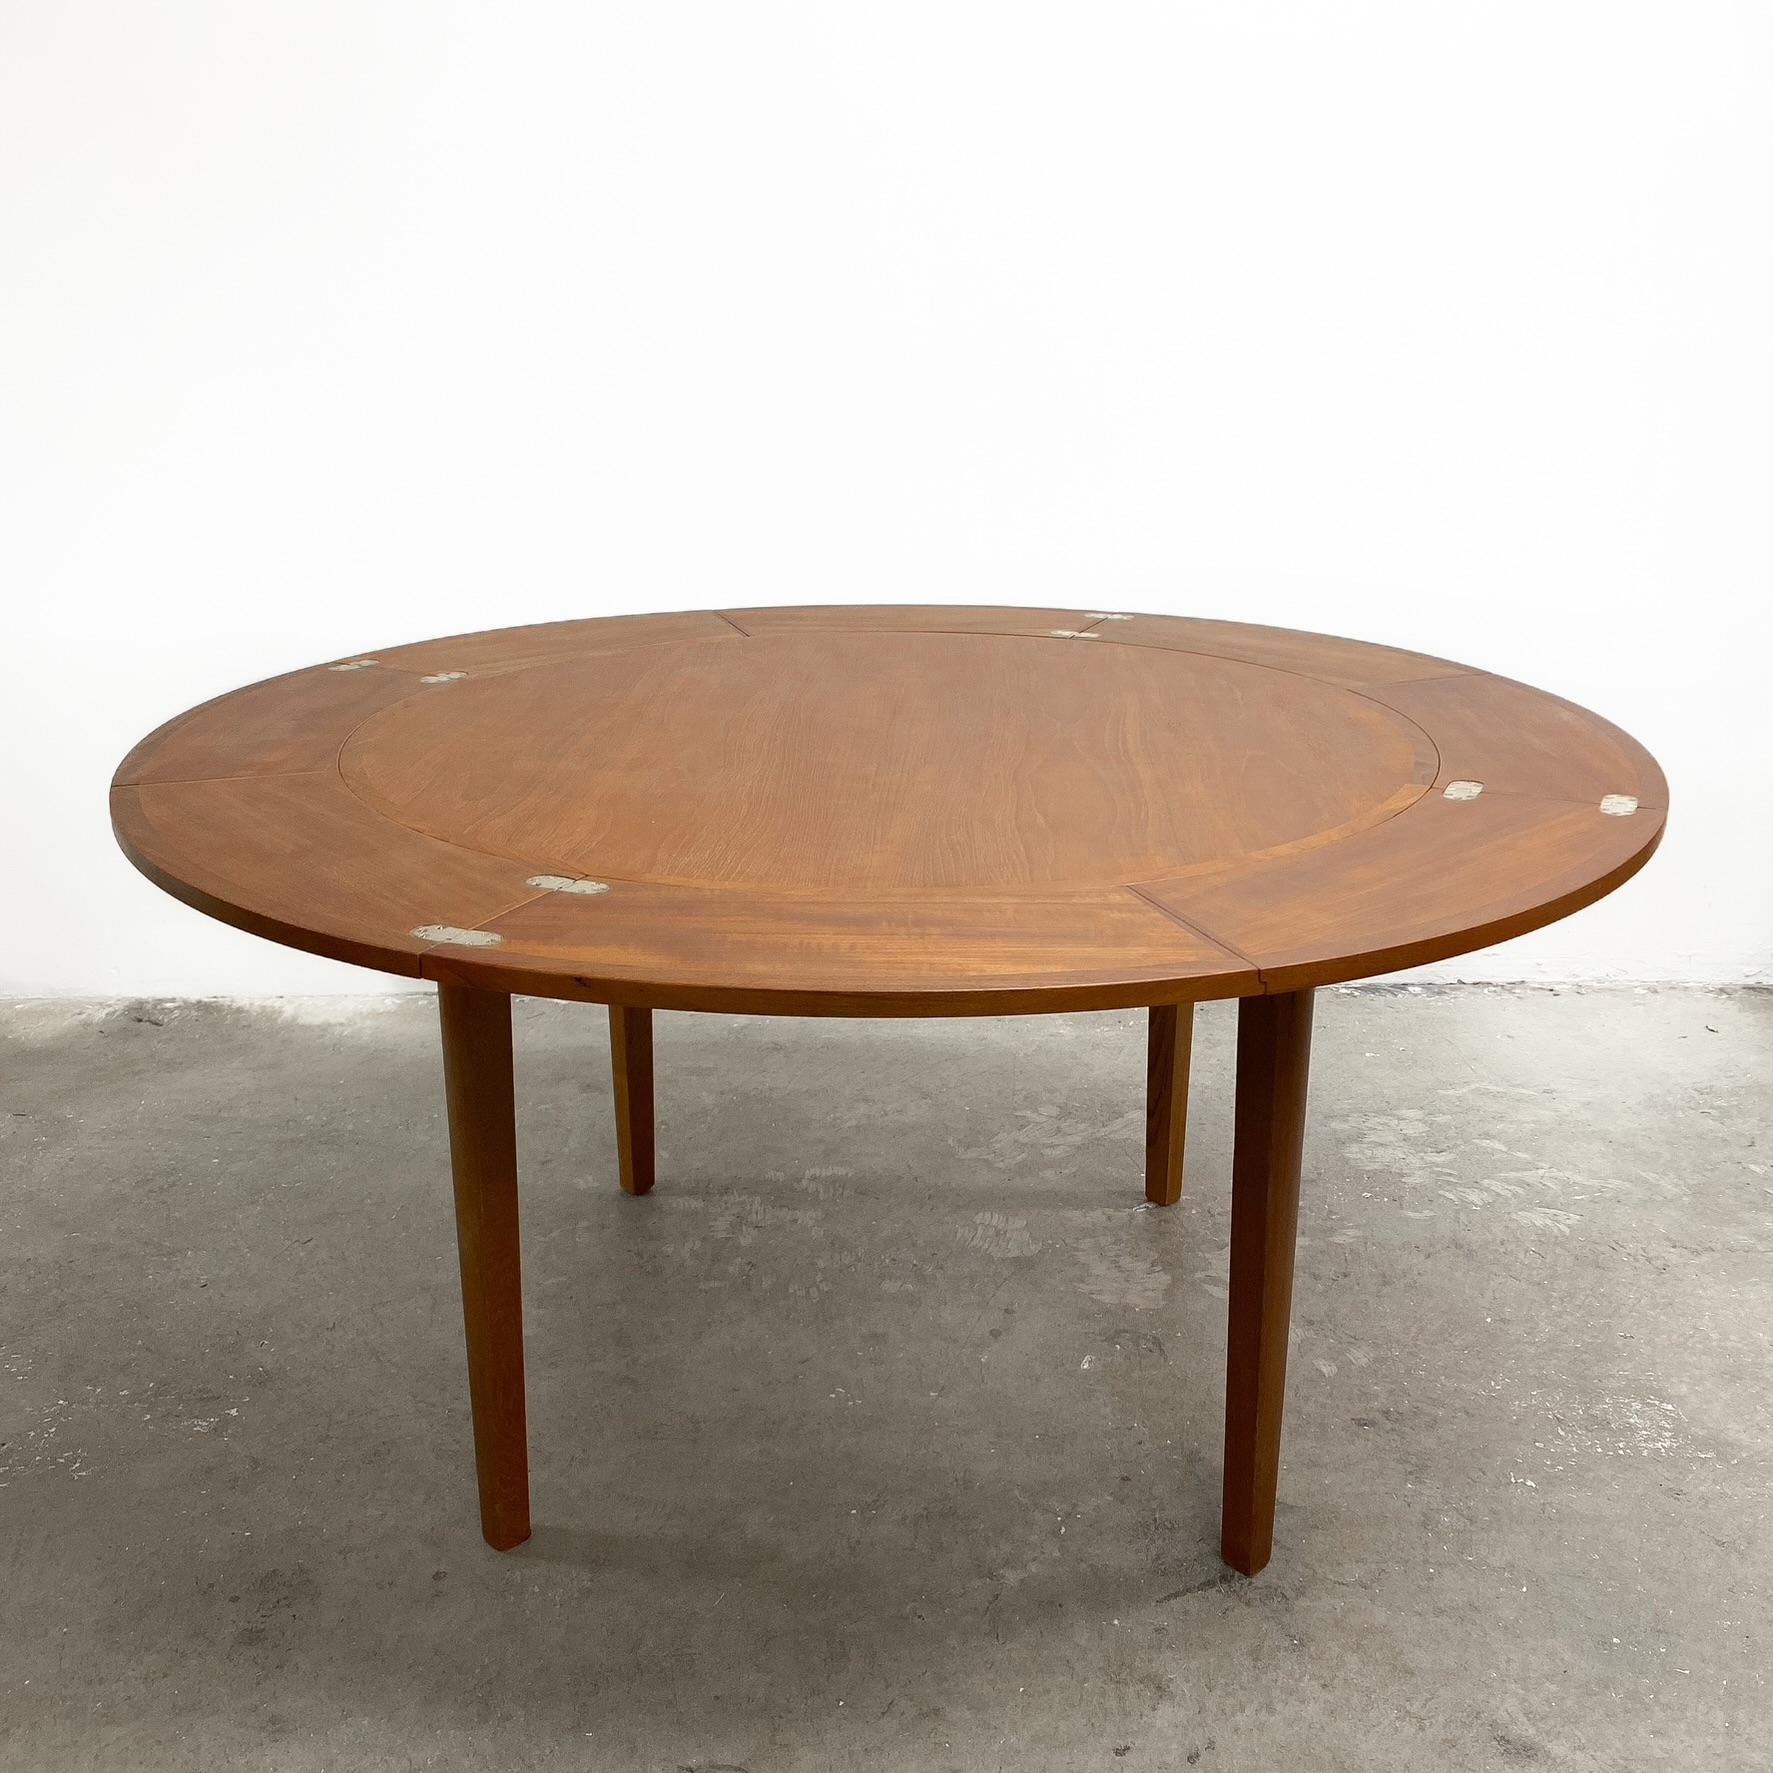 Mid Century rare circular to circular flip-flap TH Brown Extension Dining Table. It retains its original circular metal badge to the underside.

This extendable dining table has four leaves which pull out and flip over to rest on each other to form